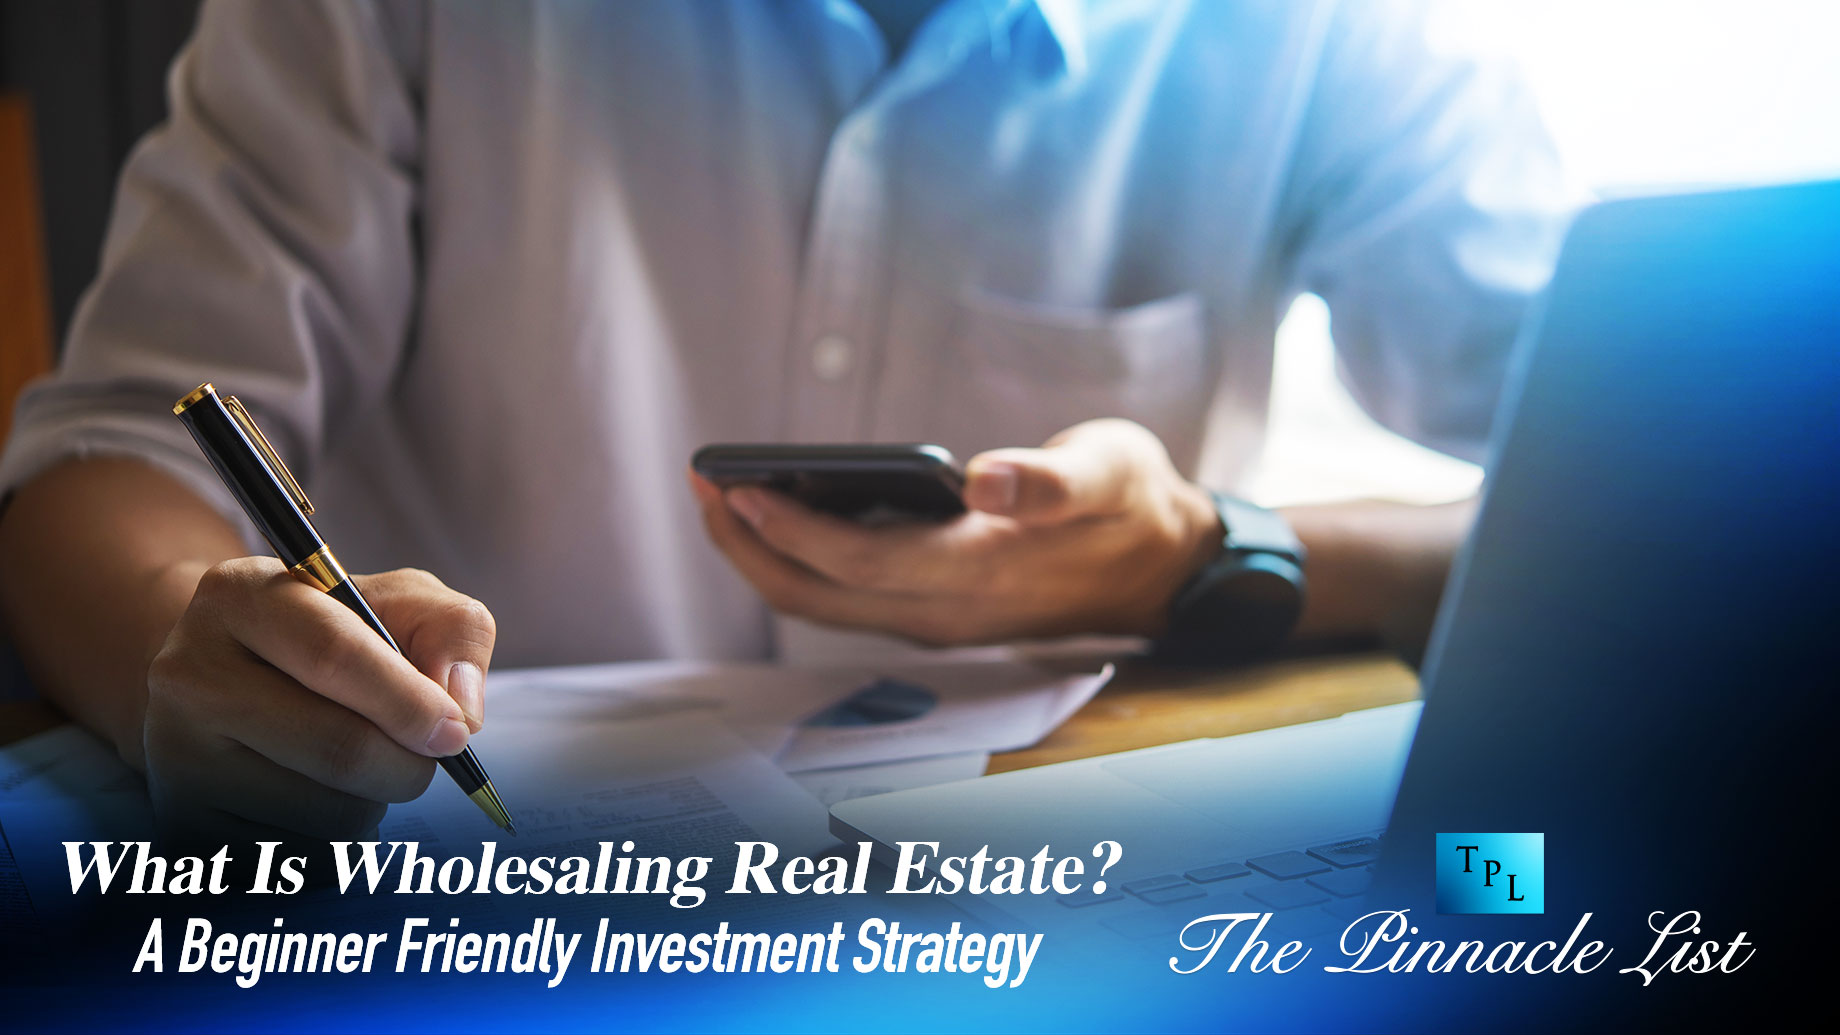 What Is Wholesaling Real Estate? A Beginner Friendly Investment Strategy